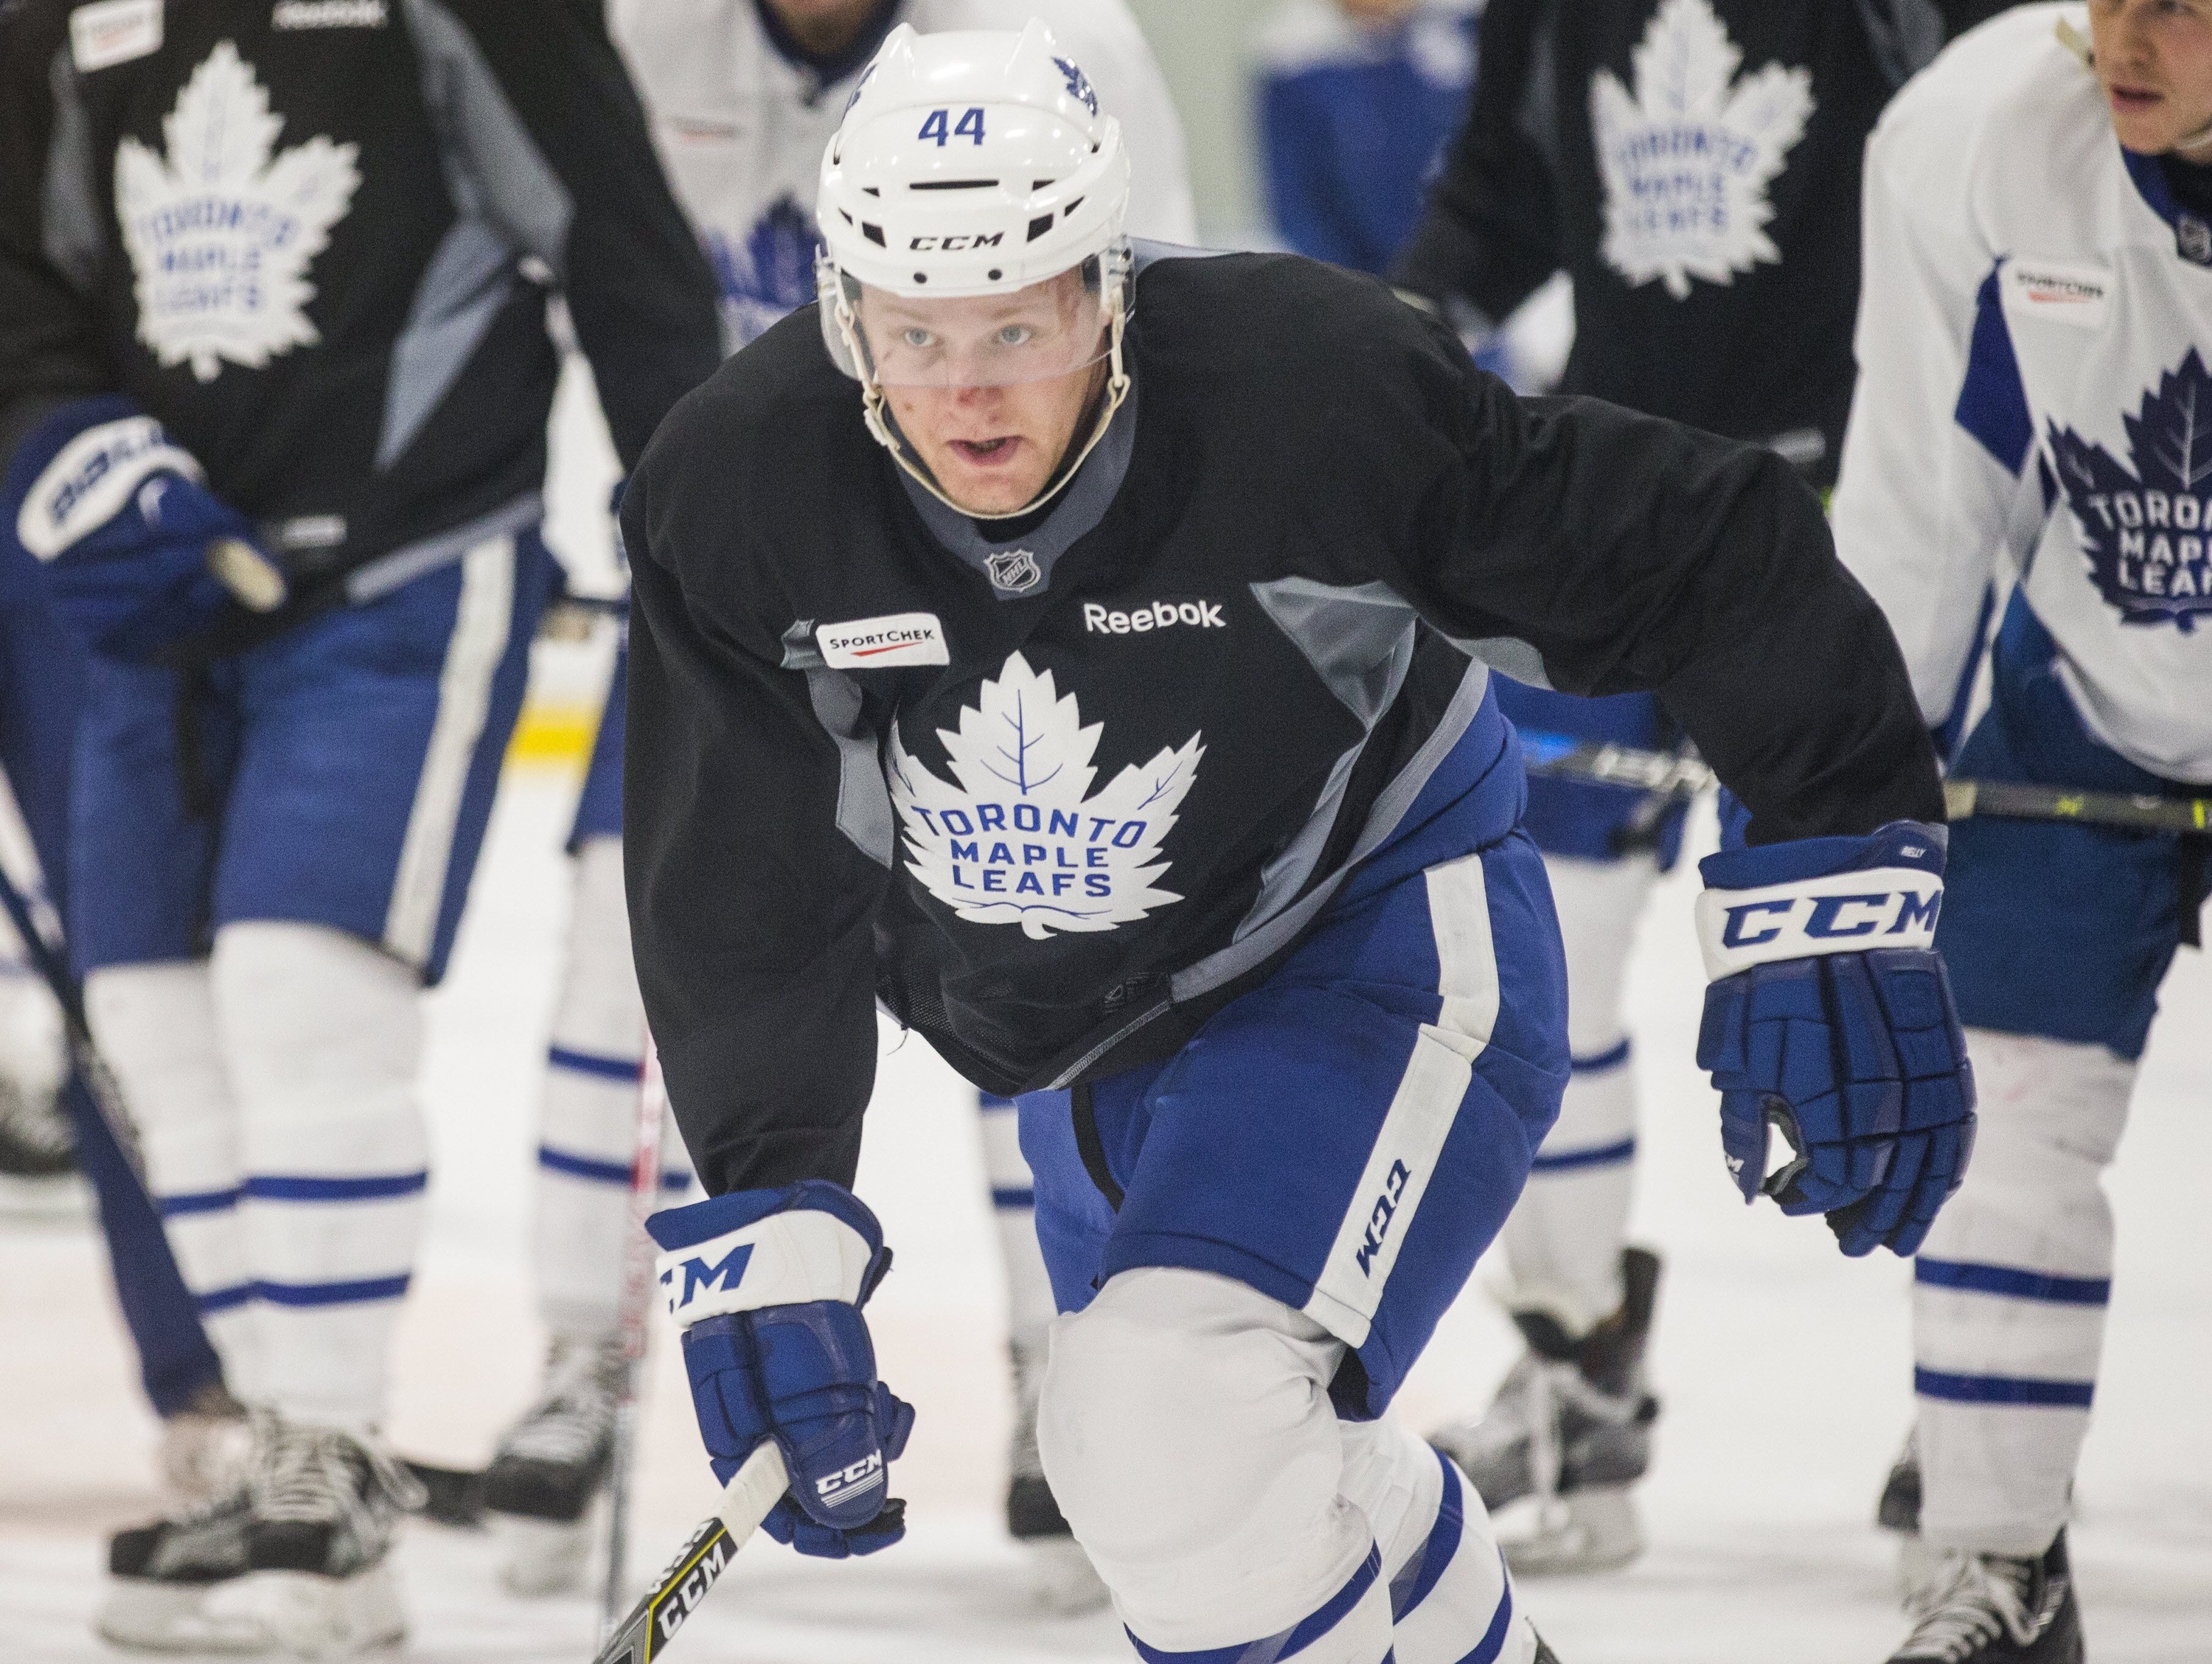 Leafs' Rielly: 'I wish players had the right to do more' amid